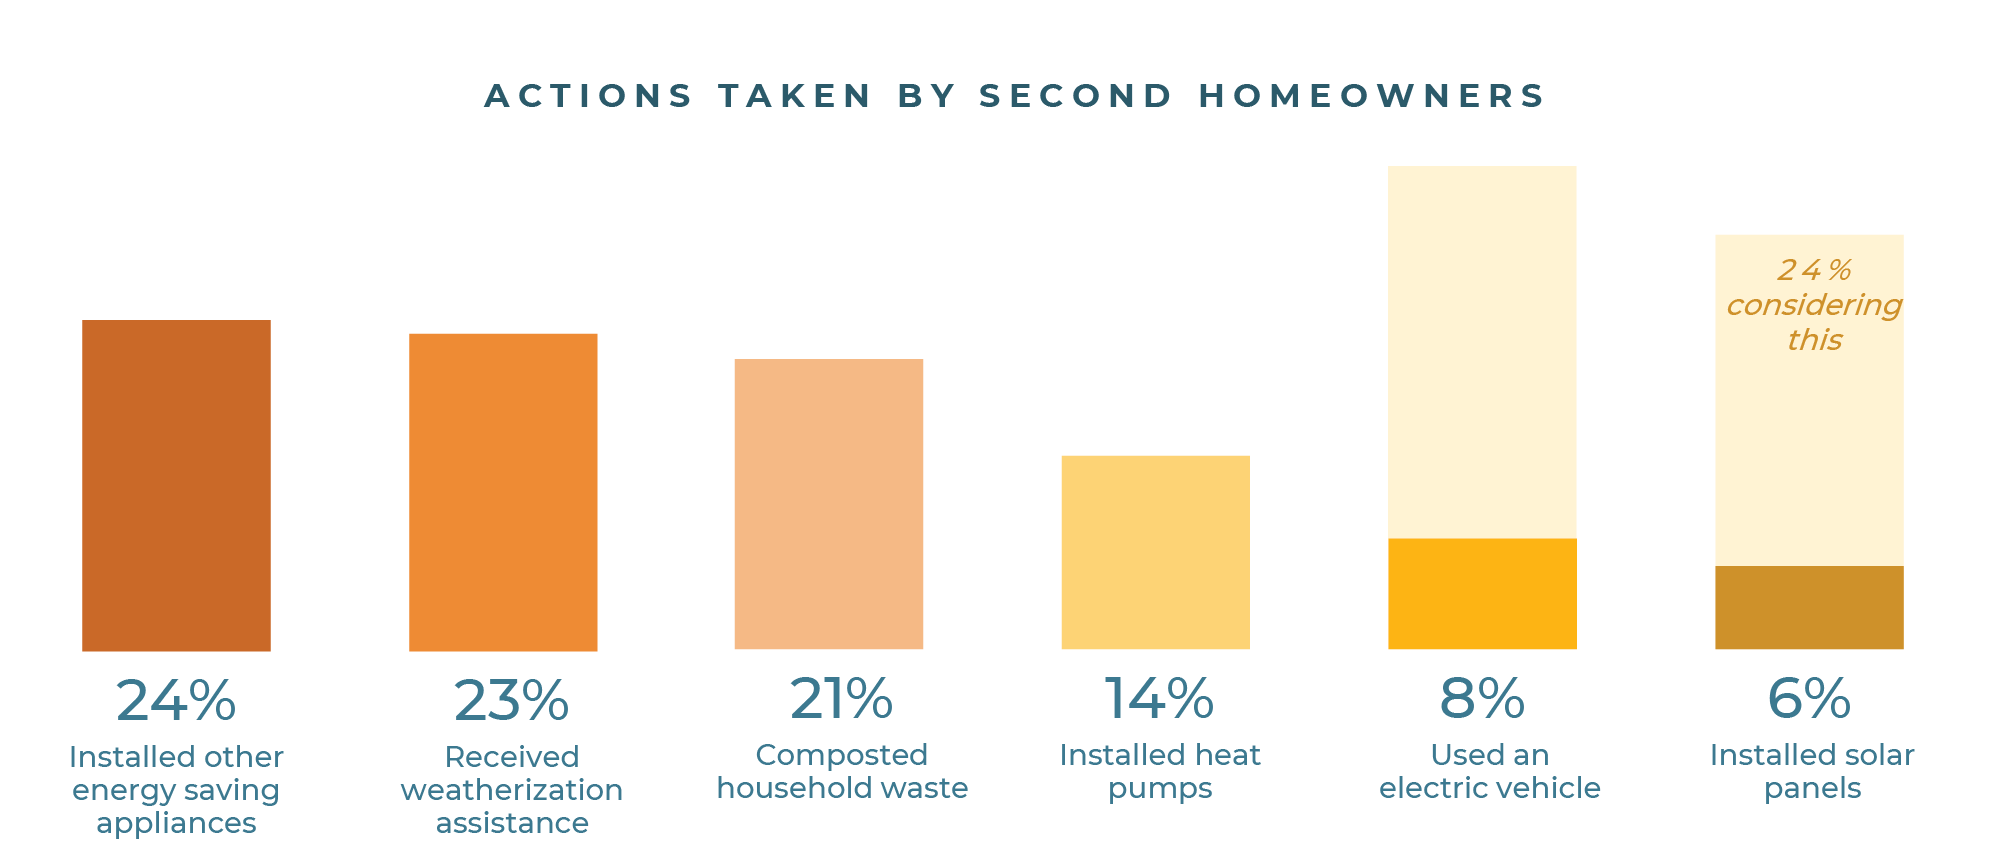 Graphic showing percent of second homeowners that had taken certain actions to improve energy efficiency or reduce greenhouse gas emissions